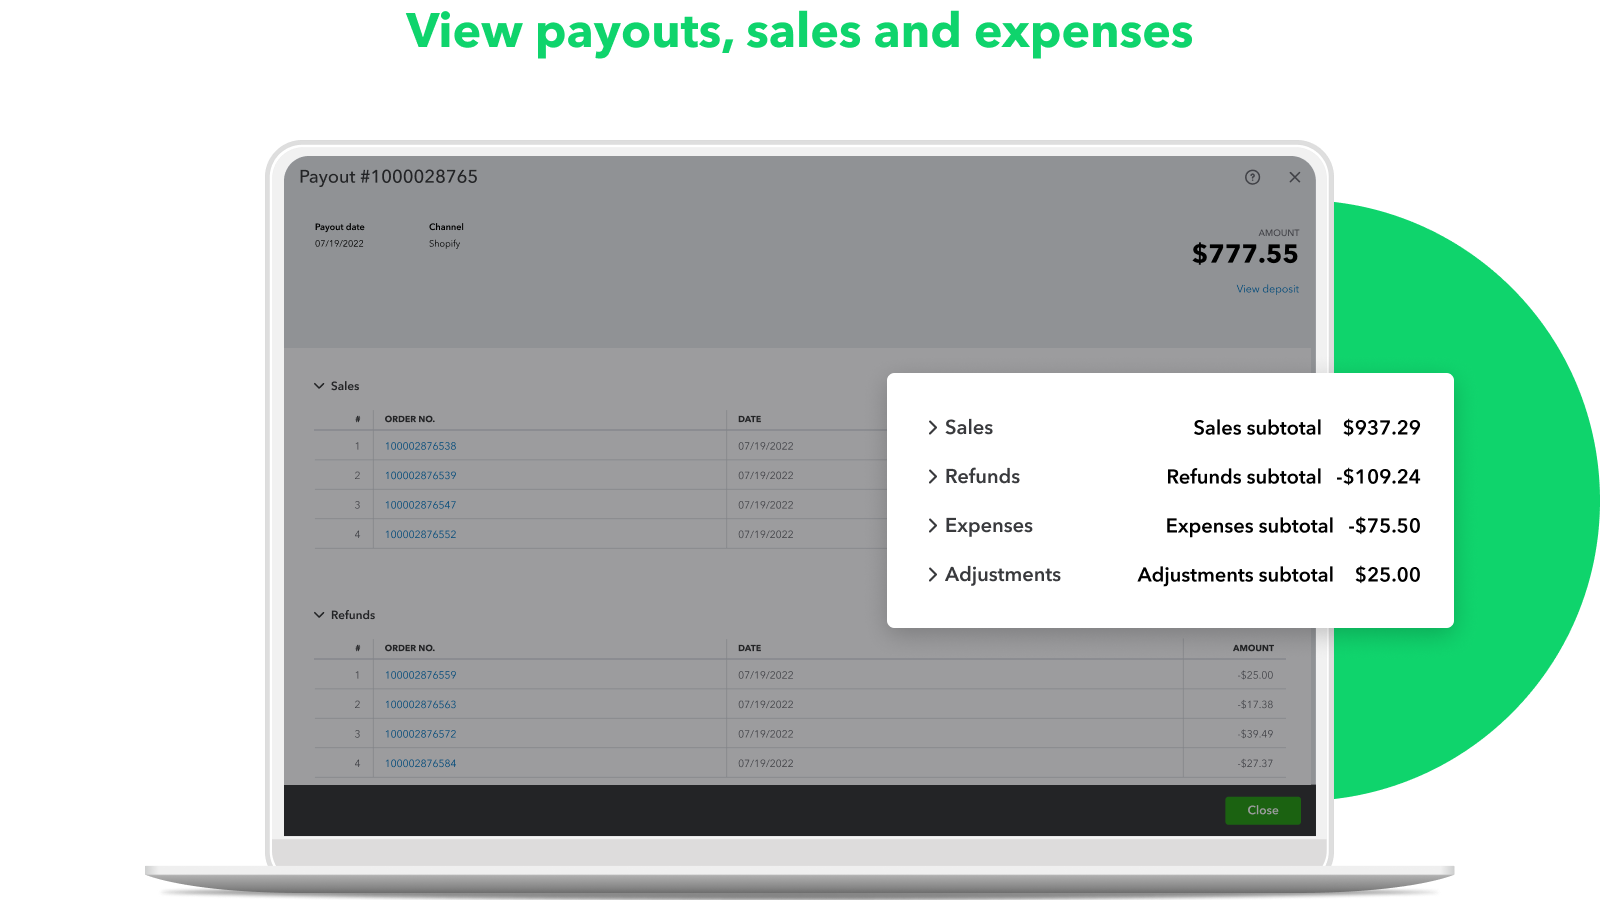 View payouts, sales and expenses